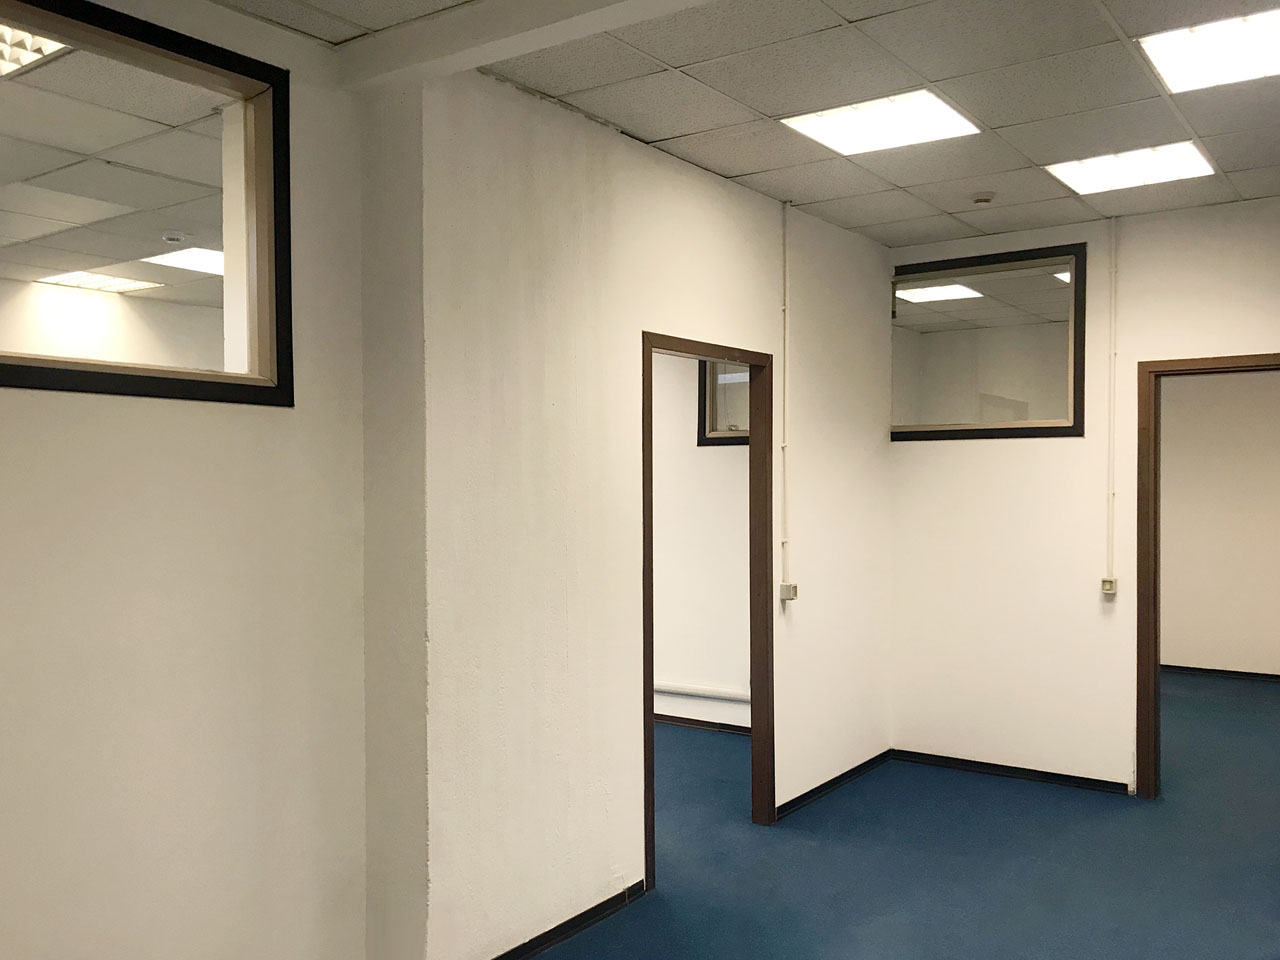 Space 1 - Warehouse for rent in Milan - 100 sqm (1076 sqft) - Atlantic Business Center